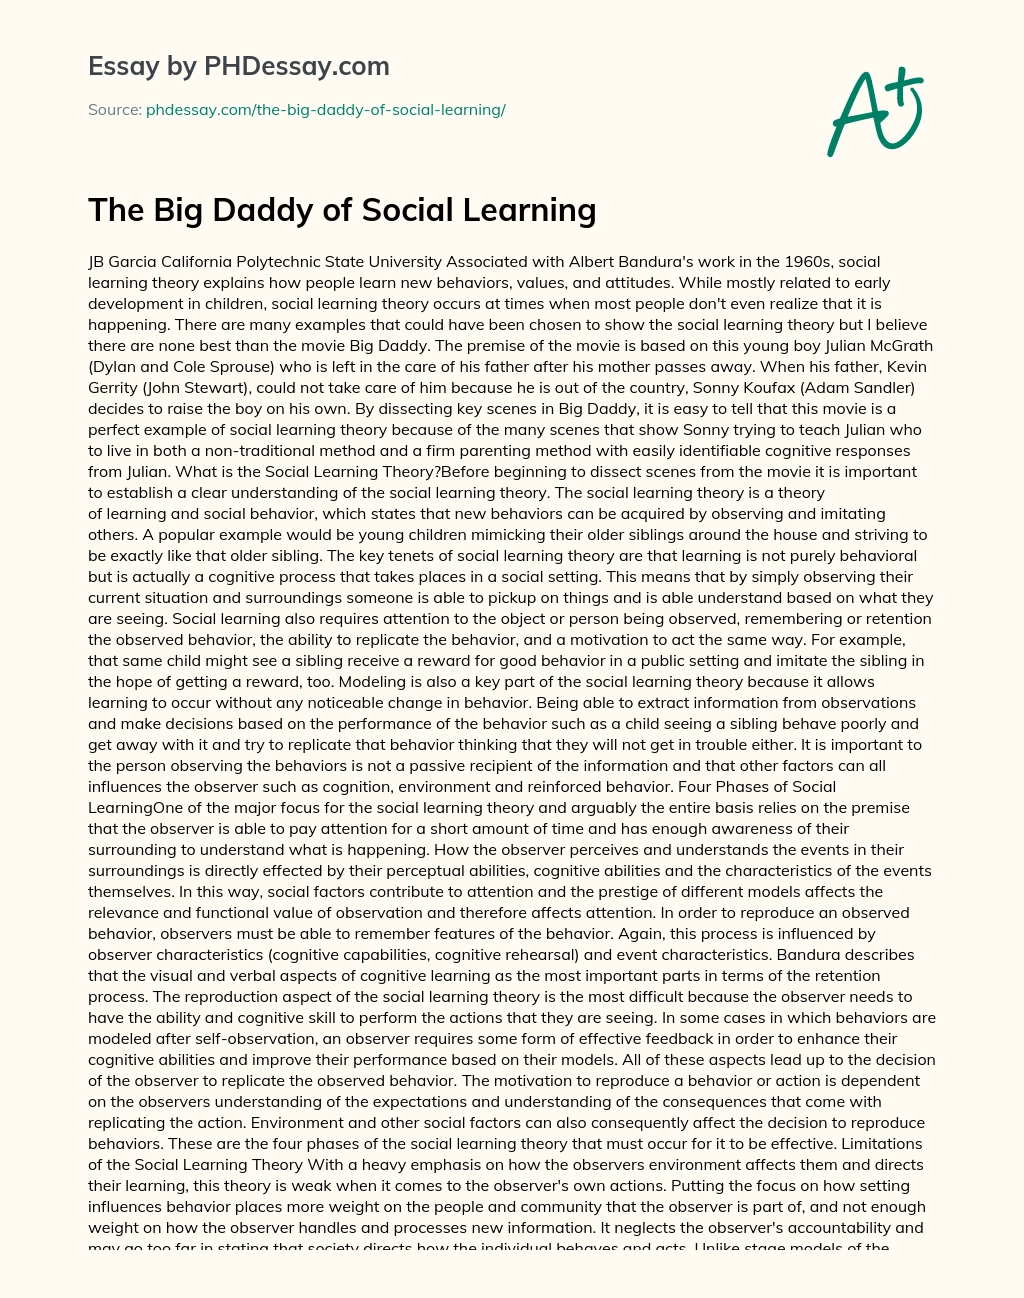 The Big Daddy of Social Learning essay